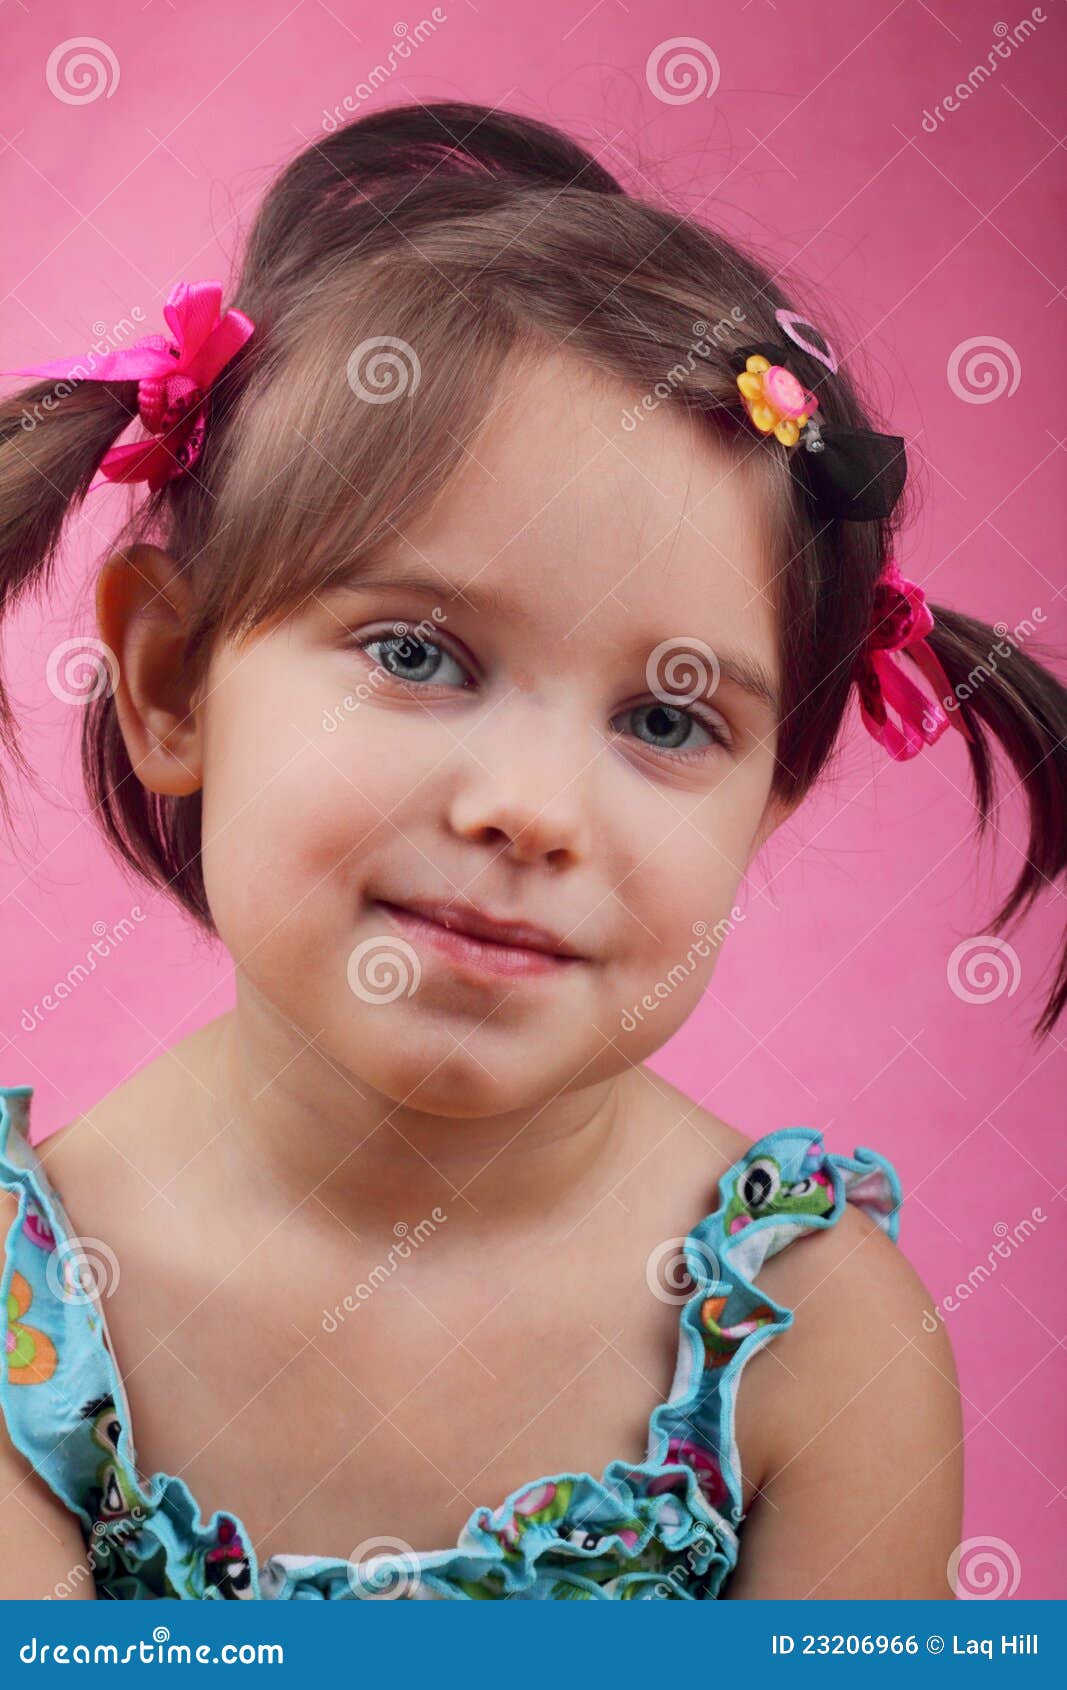 She fixed her own hair. stock photo. Image of girl, fixed - 23206966